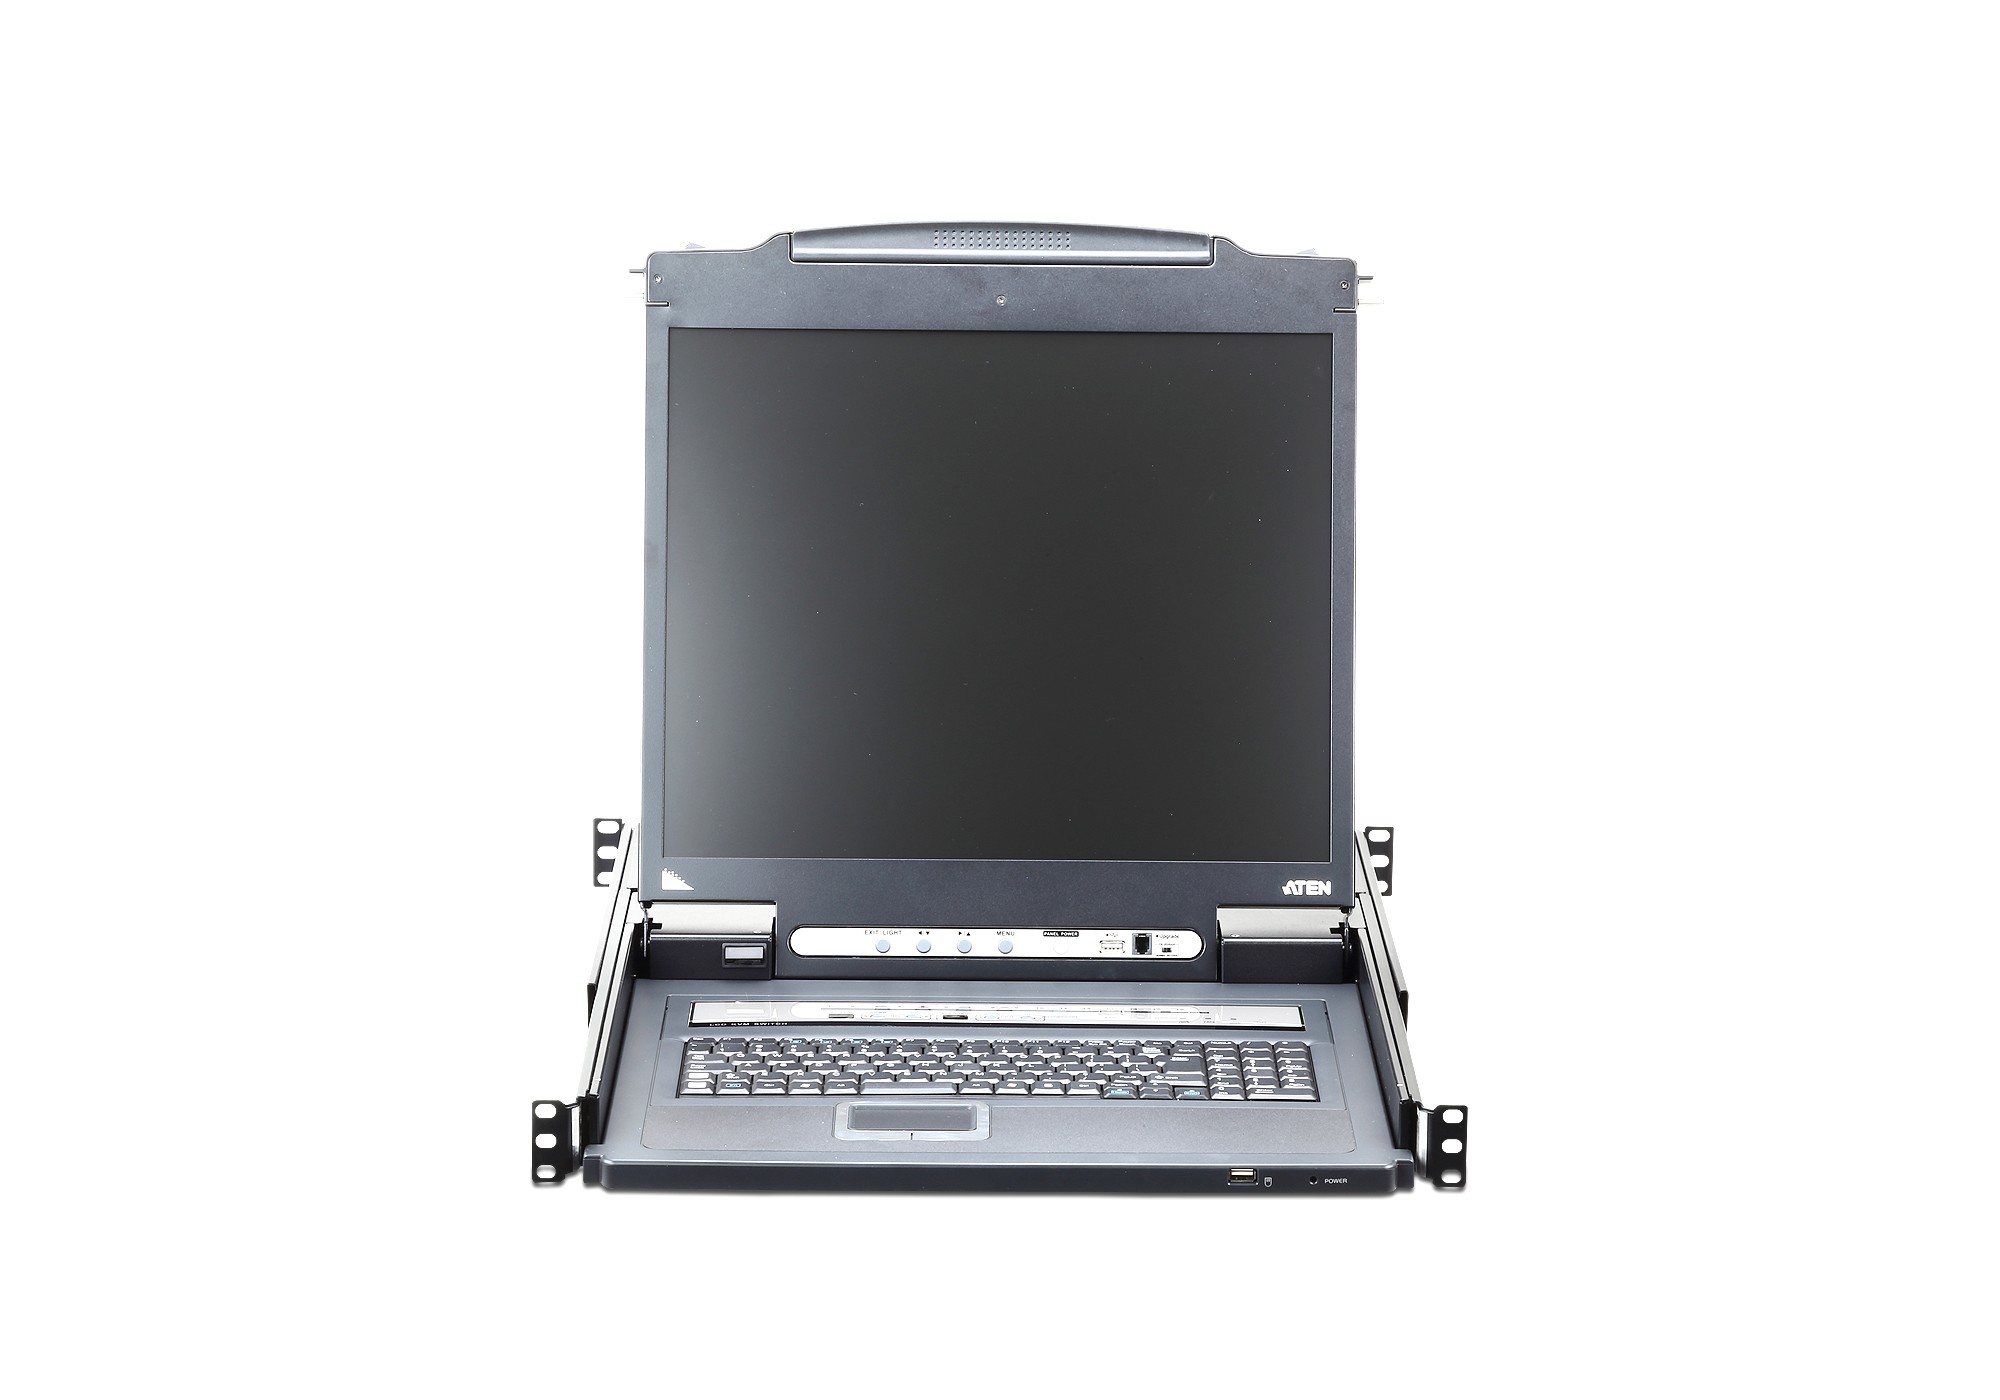 CL5716IM  16-Port Single Rail 17" LCD KVM over IP Switch with USB Peripheral Support, Broadcast Mode, Panel Array Mode, Daisy Chain and Ex